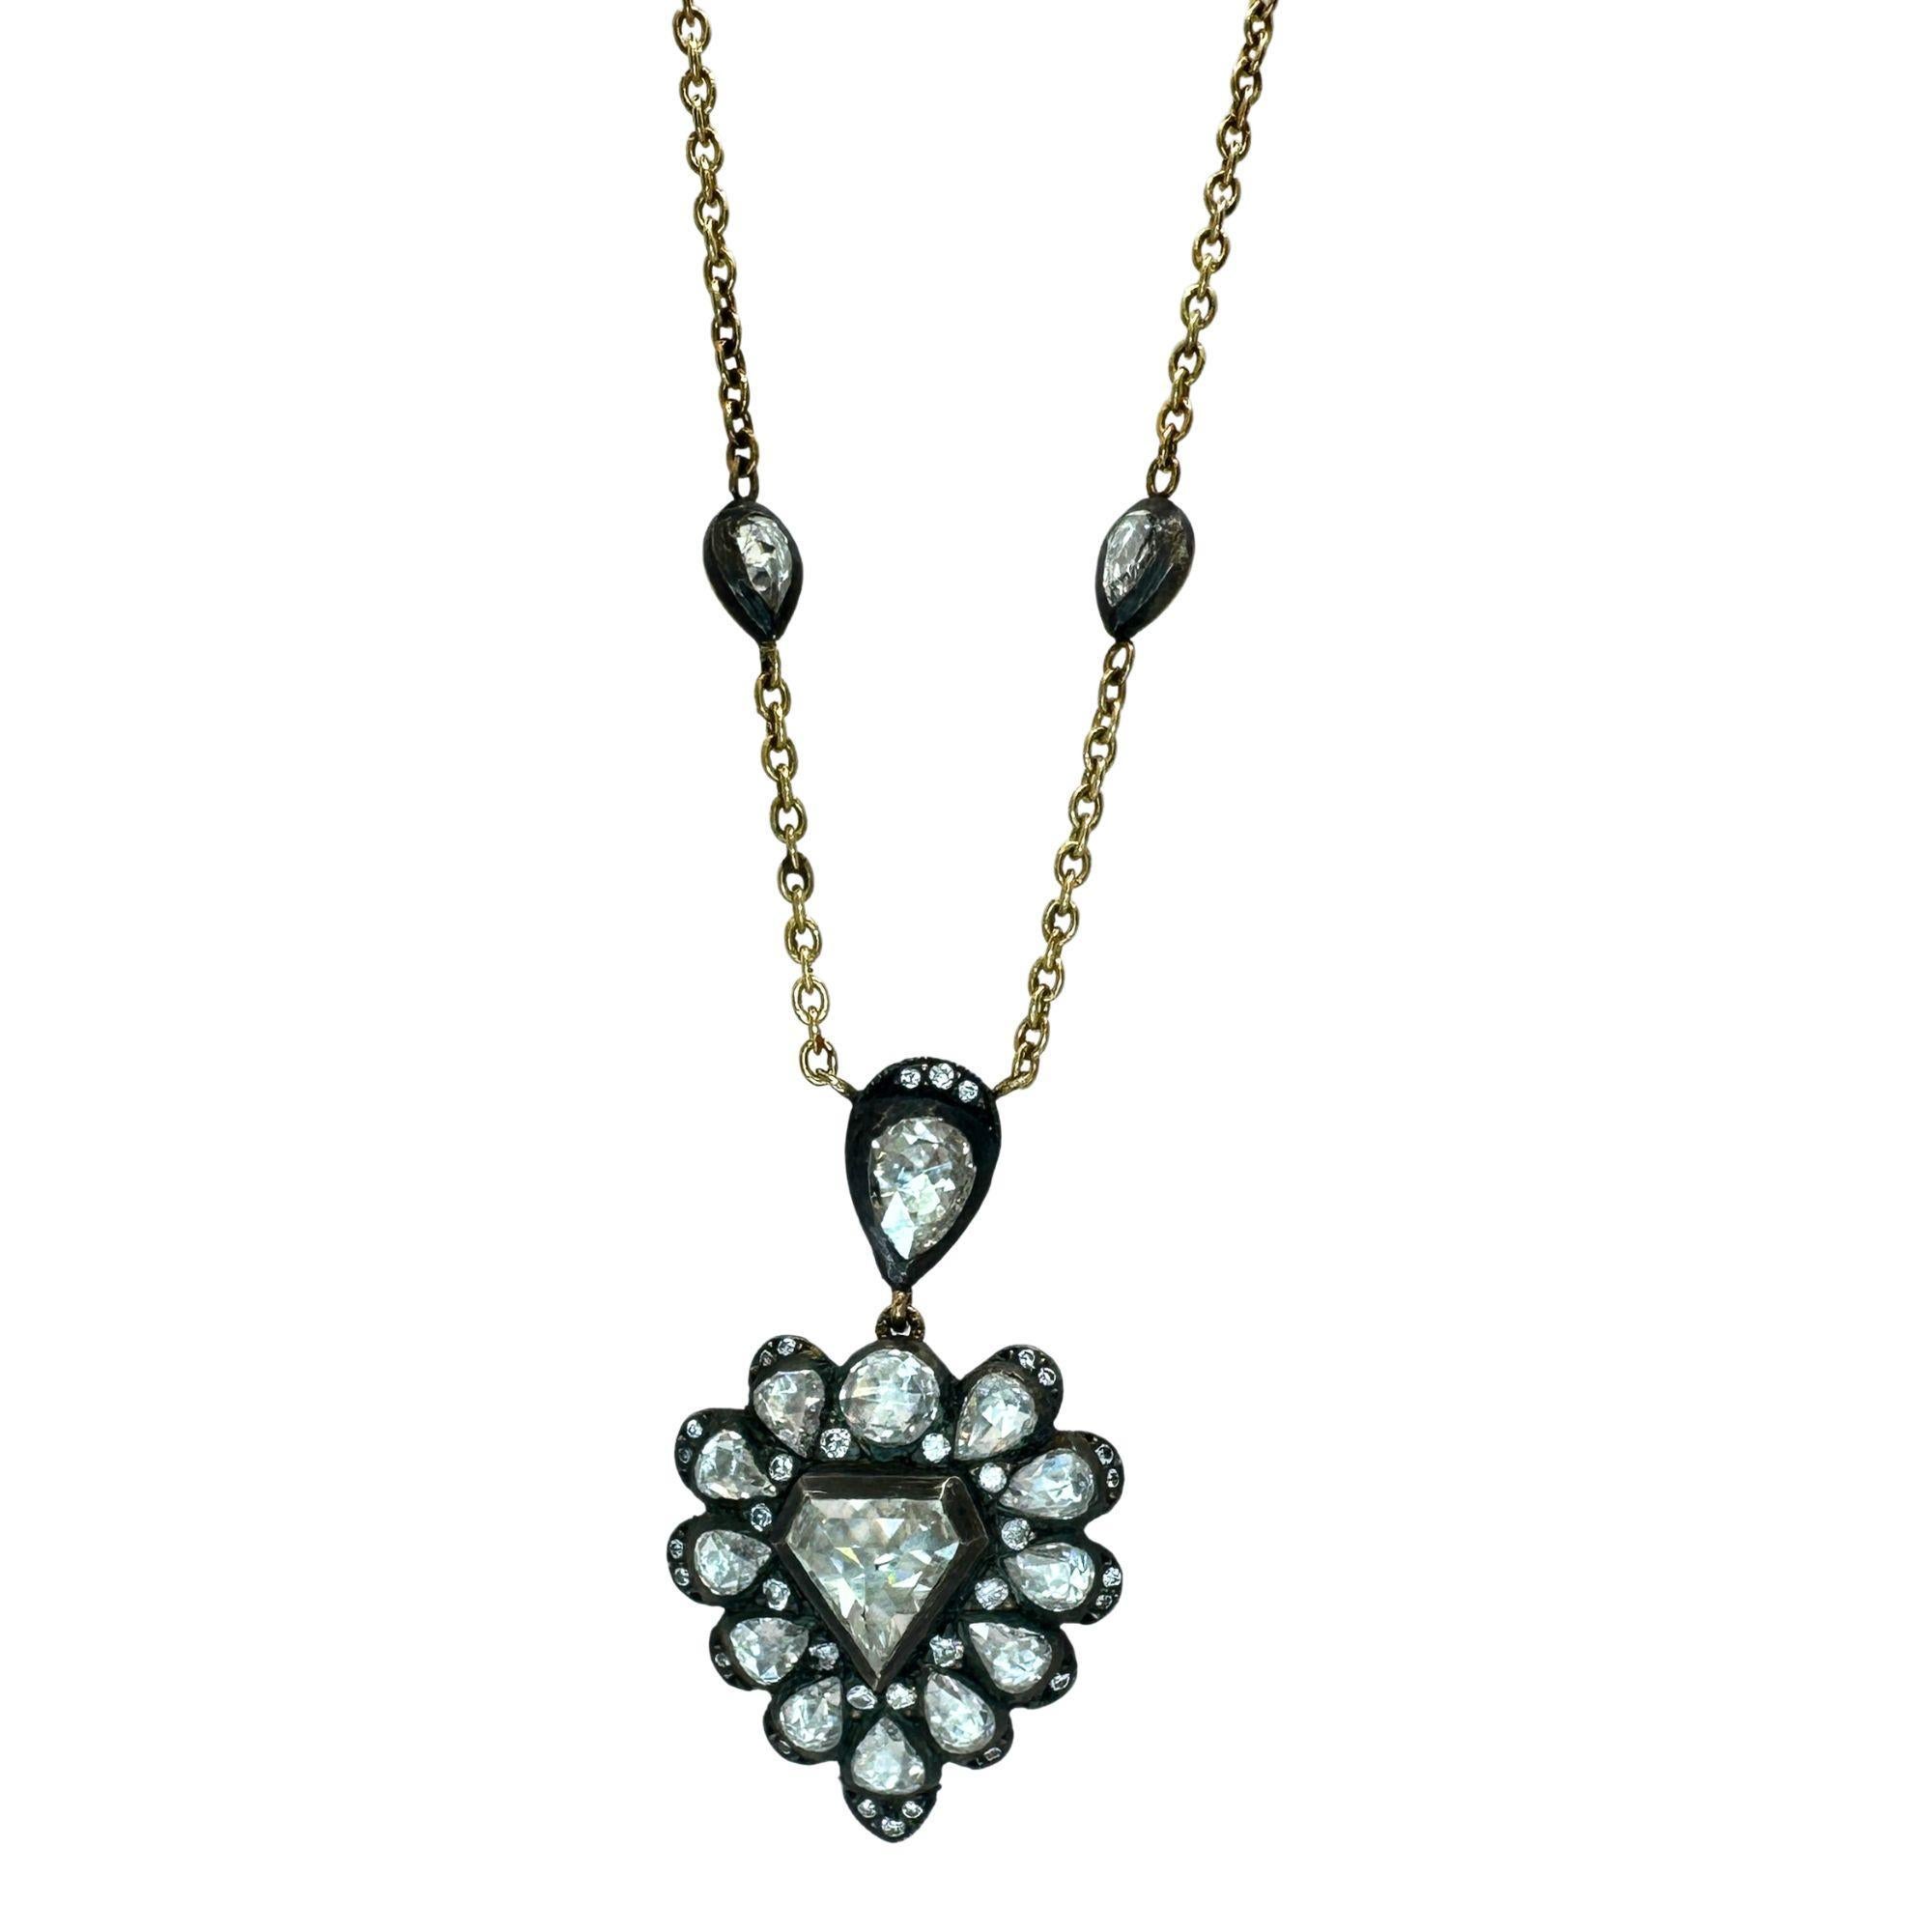 Women's 18k and Silver Top Rose Cut Diamond Necklace